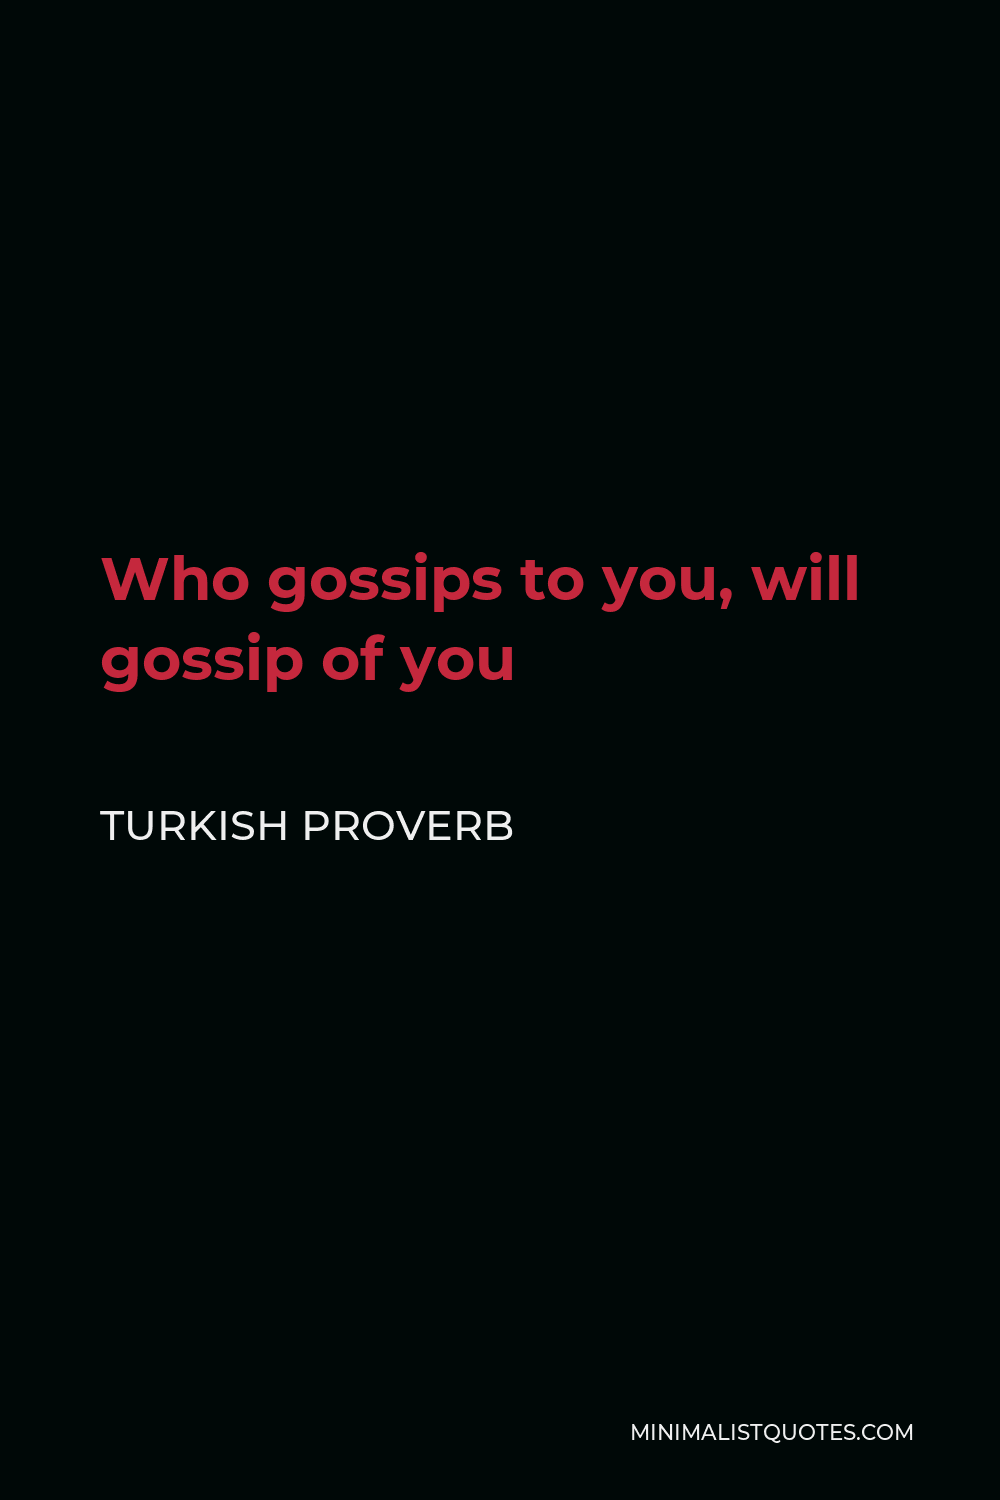 Turkish Proverb Quote - Who gossips to you, will gossip of you